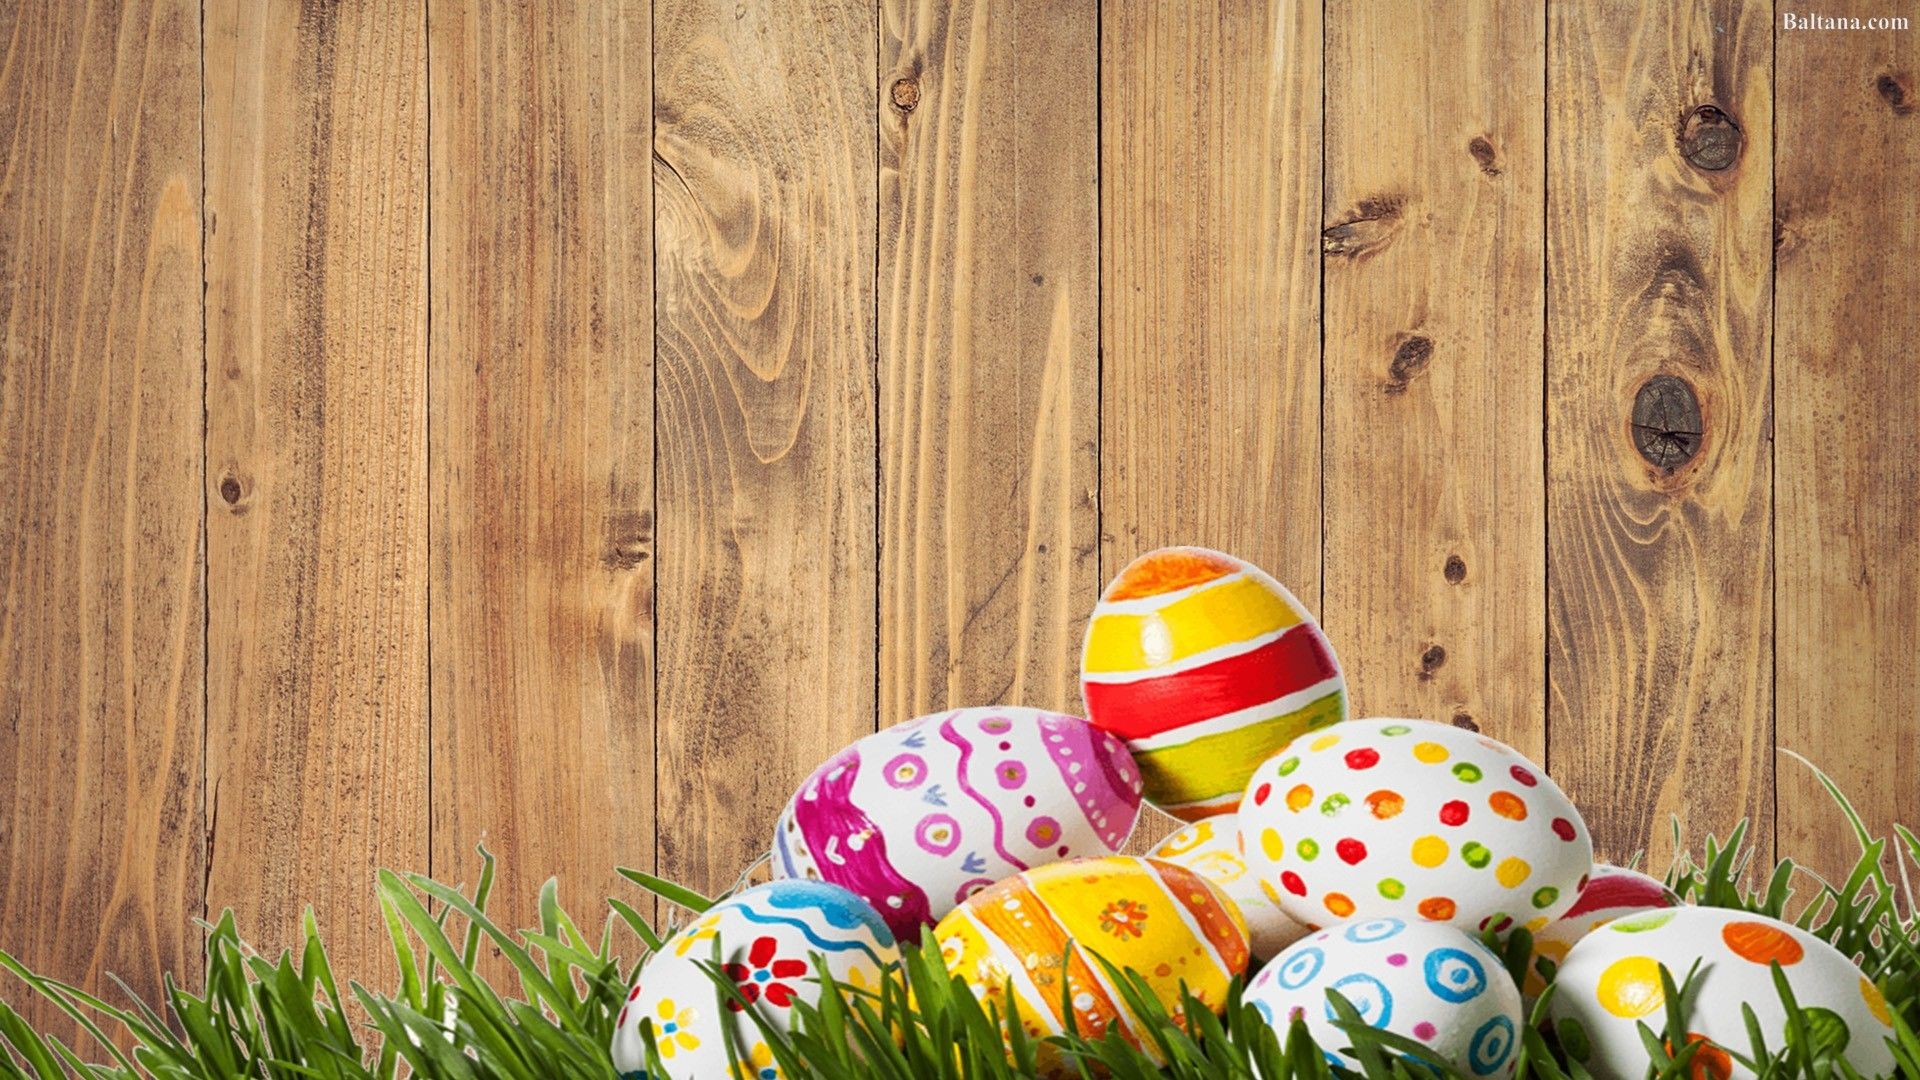 Easter Wallpaper Table Background Hd, Download Wallpaper